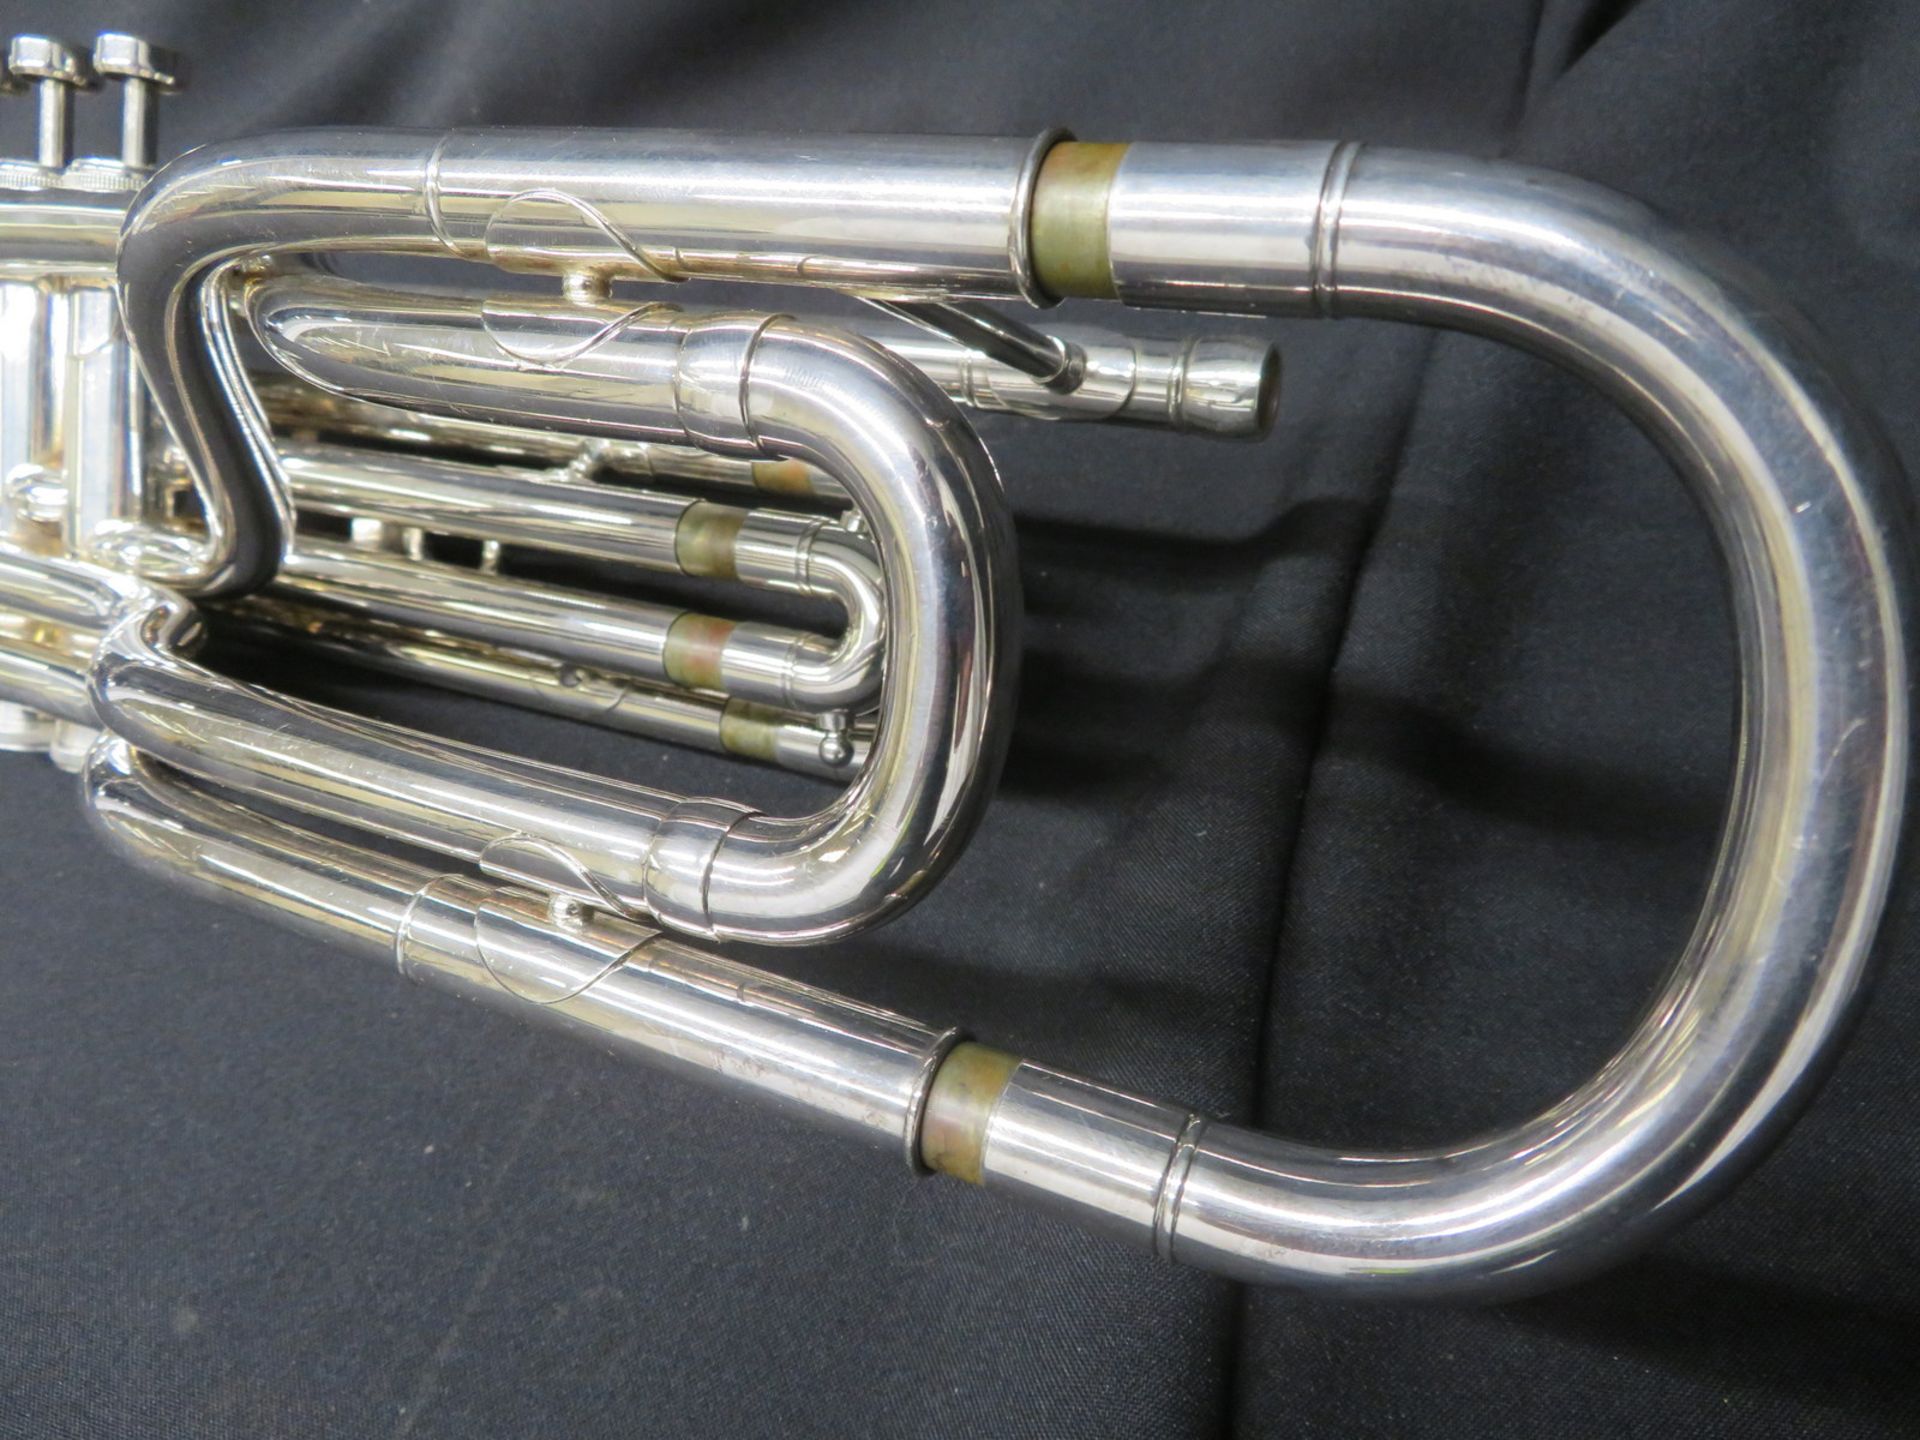 Boosey & Hawkes Besson 700 London tenor fanfare trumpet with case. Serial number: 707-740320. - Image 6 of 19